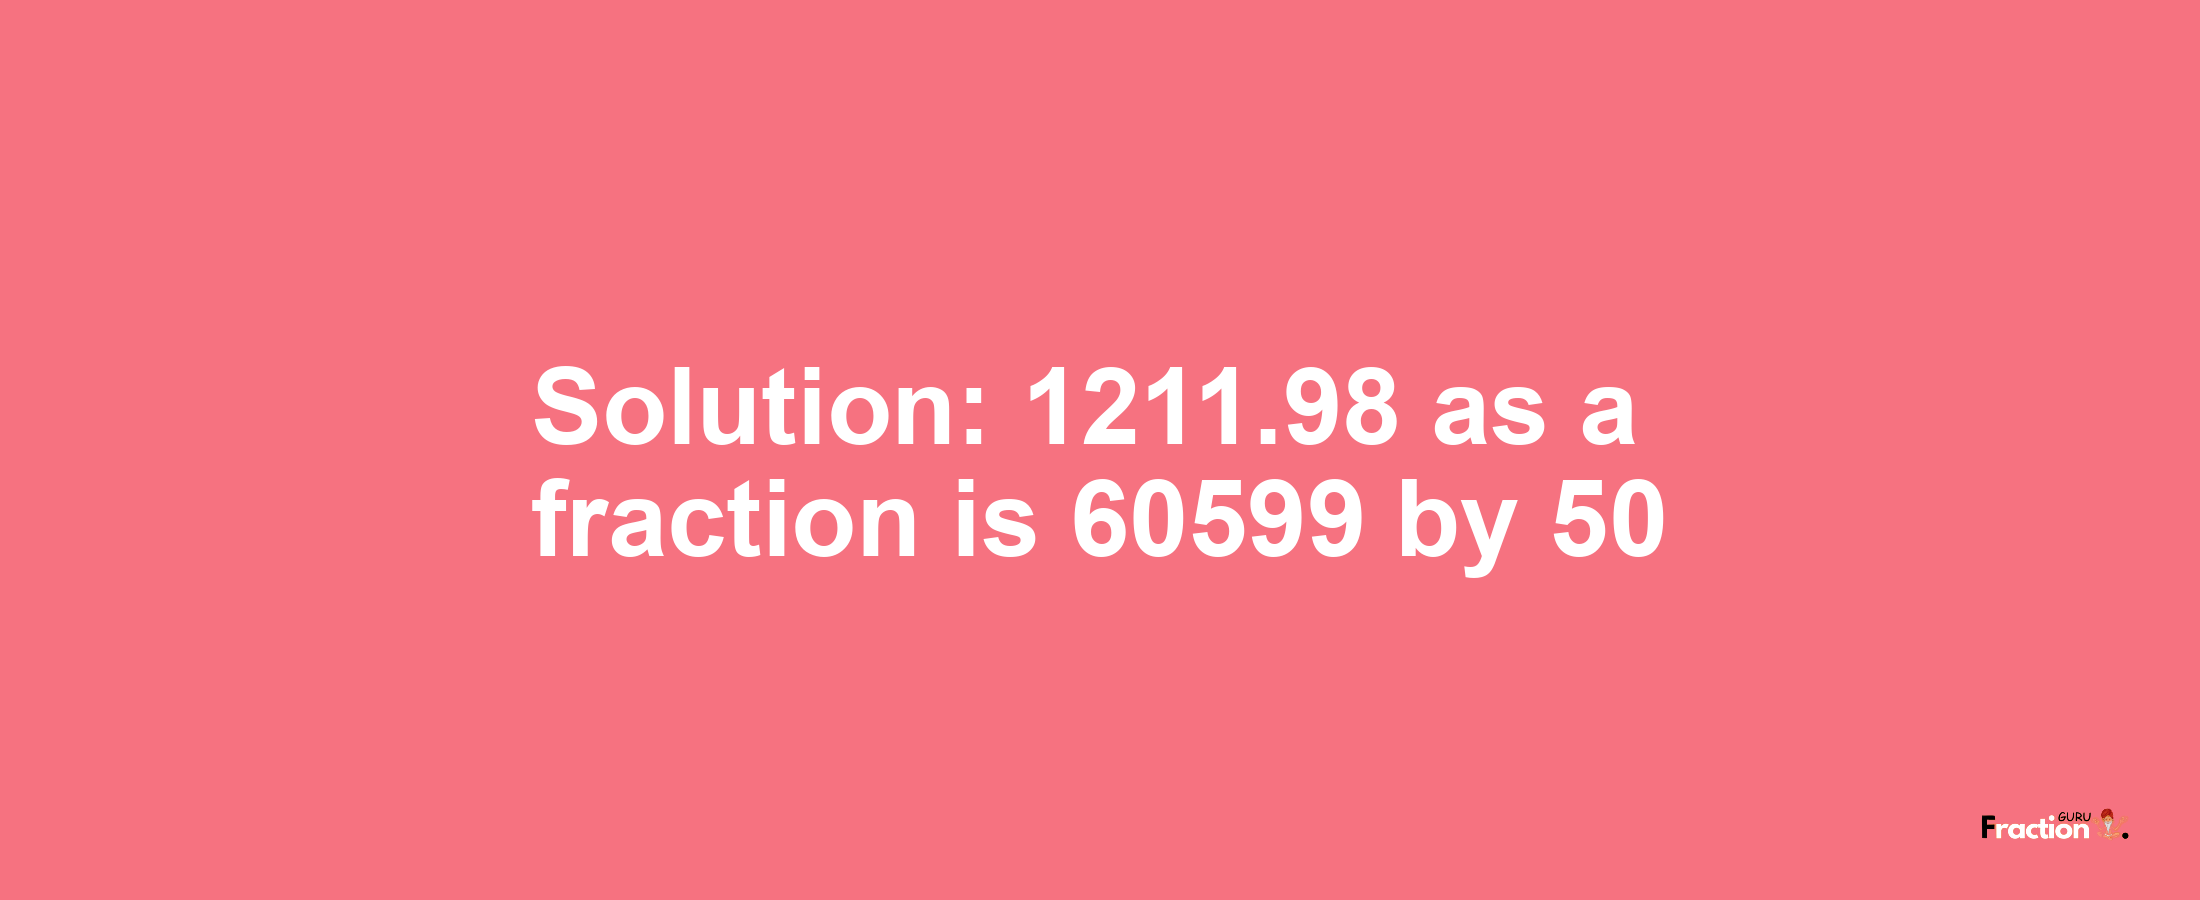 Solution:1211.98 as a fraction is 60599/50